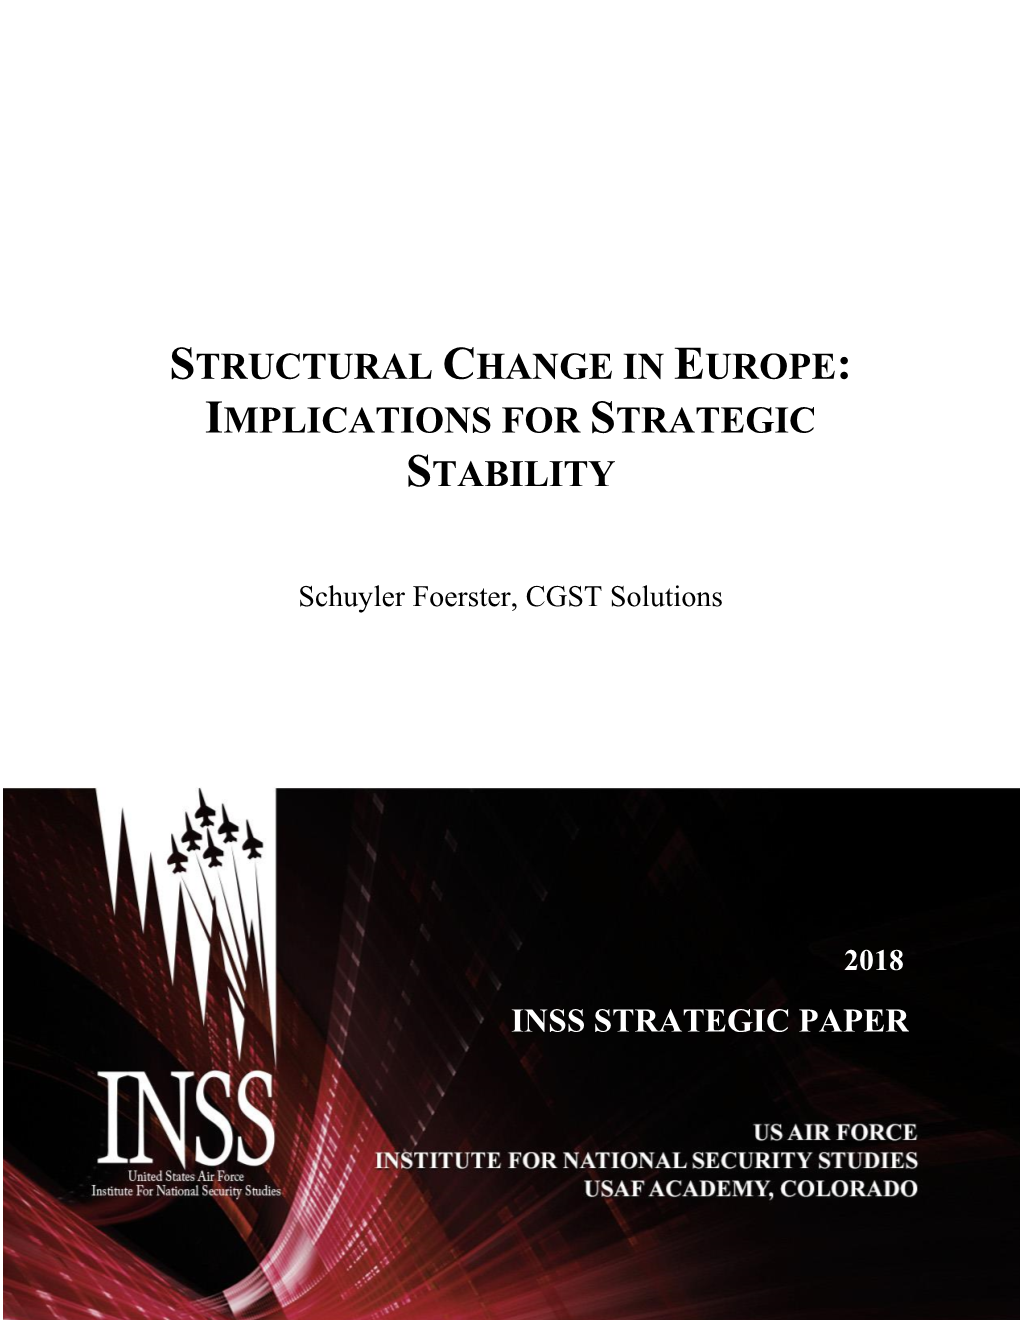 Structural Change in Europe: Implications for Strategic Stability